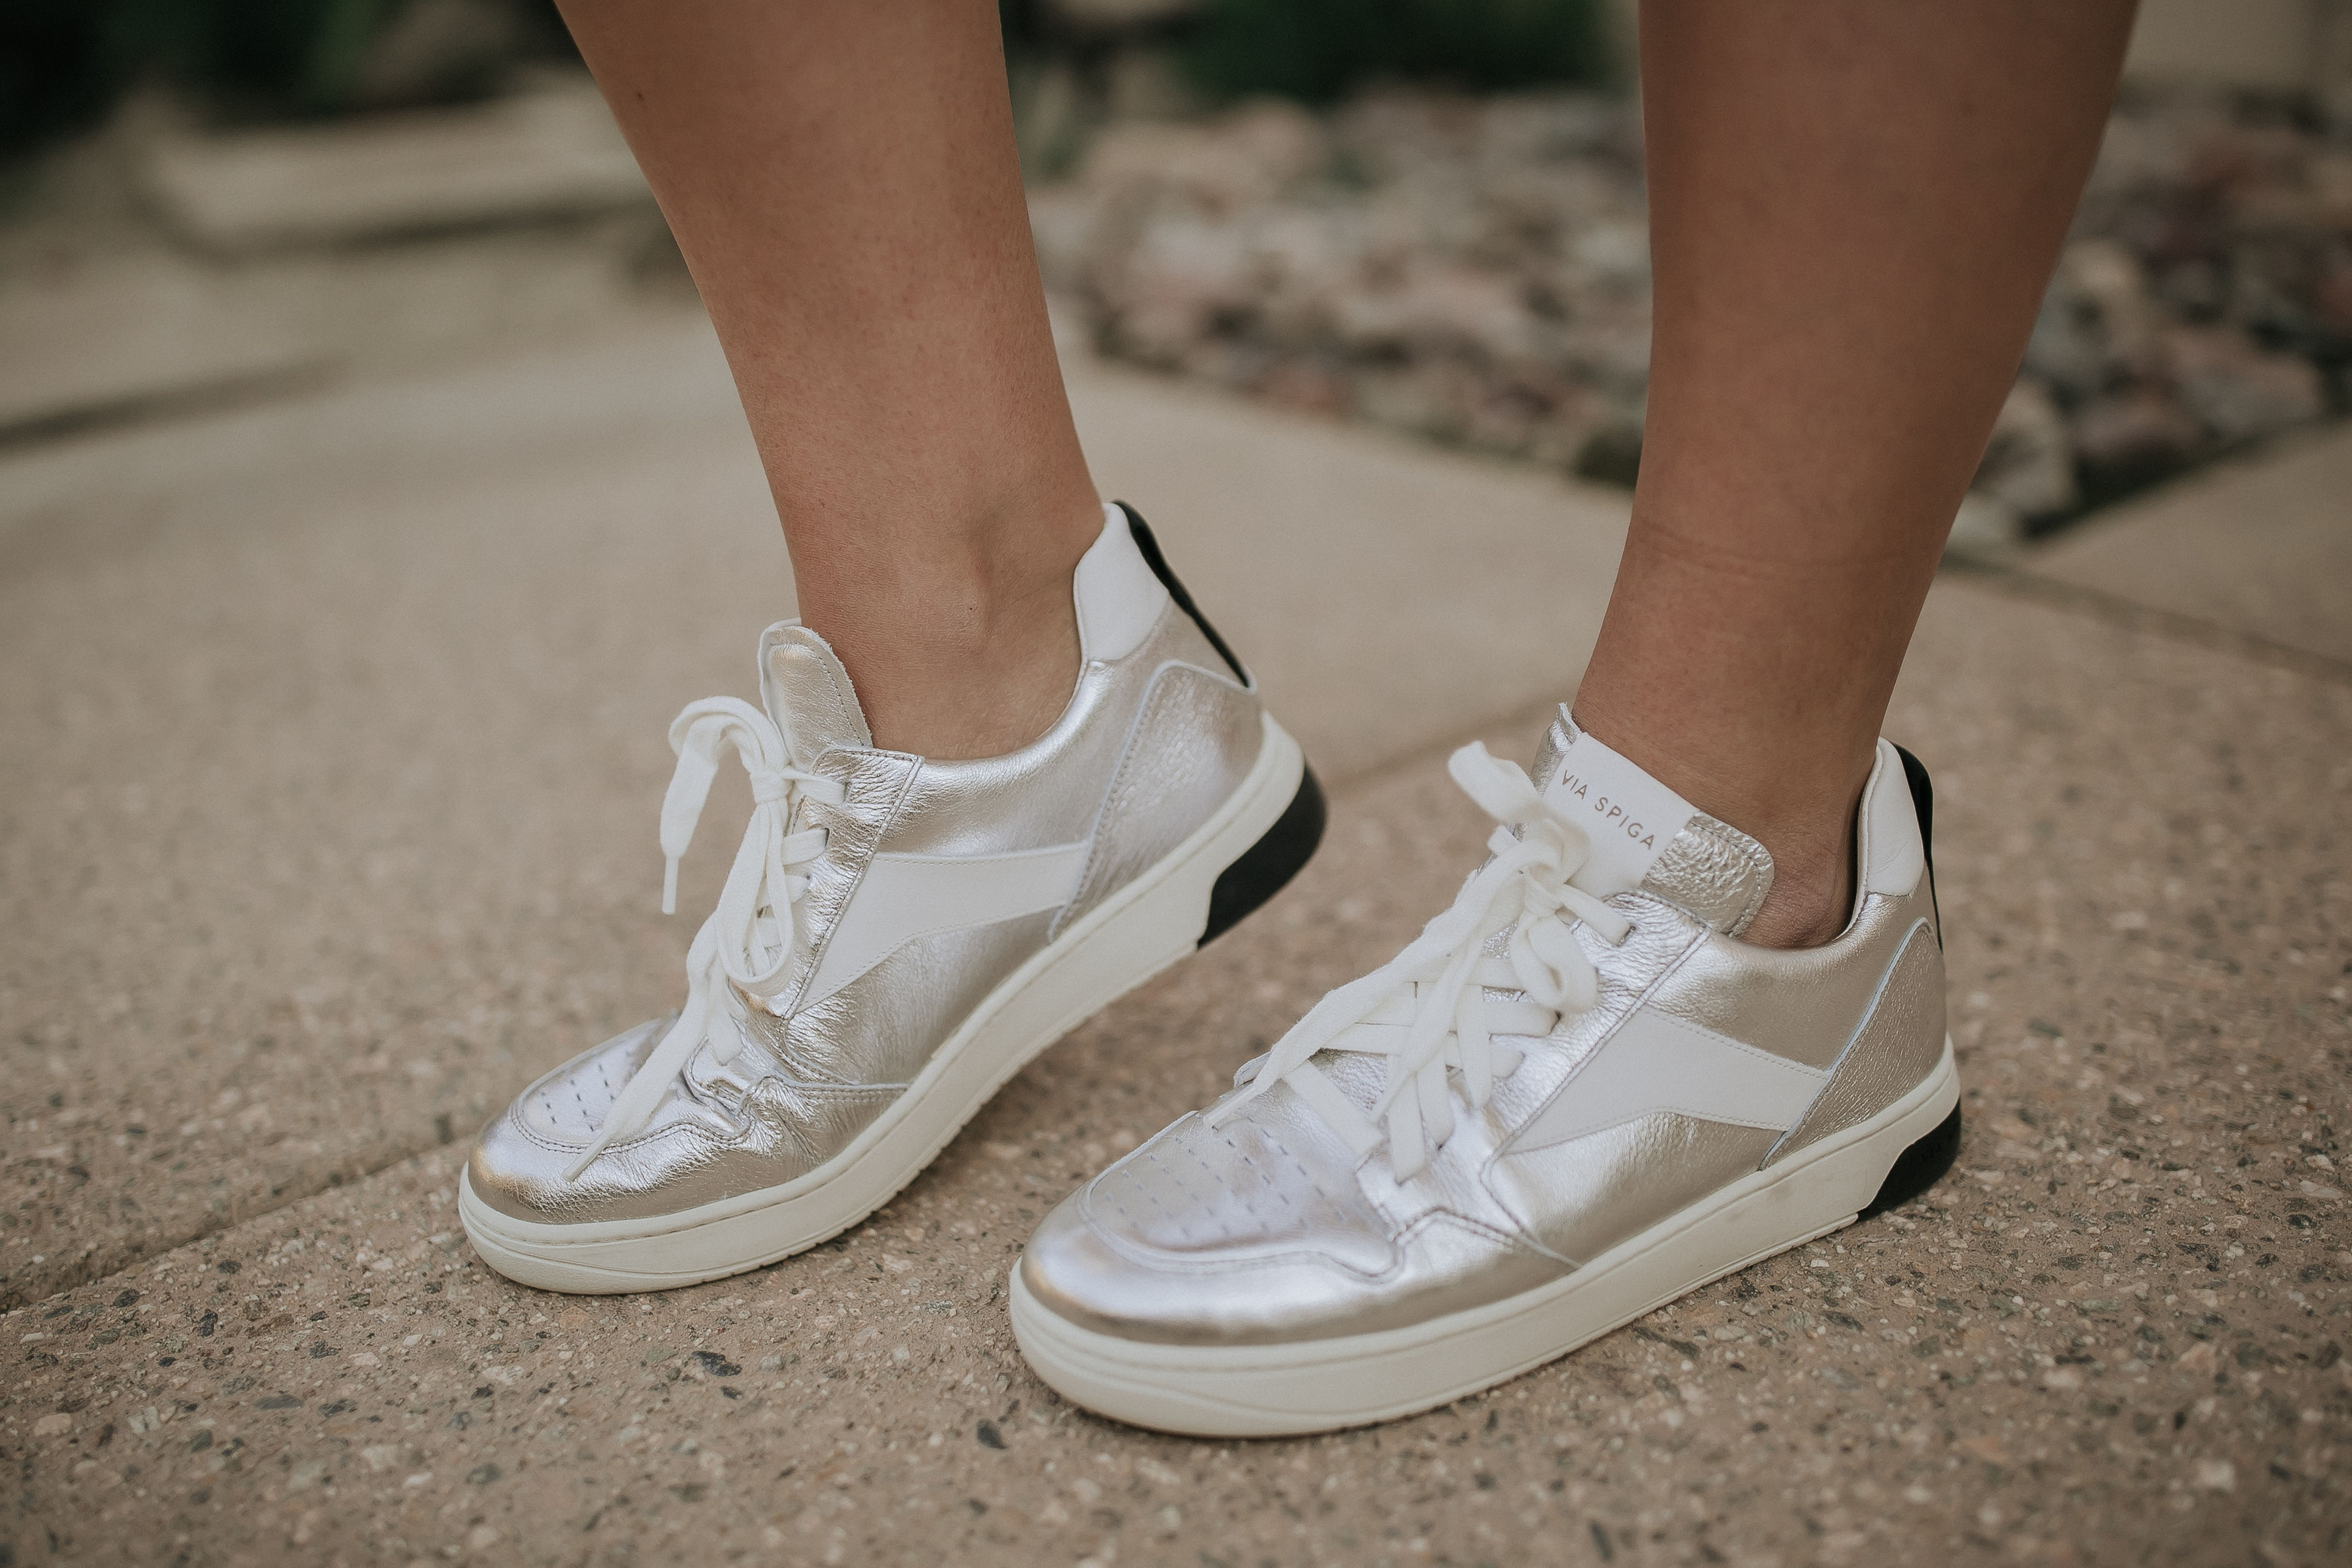 San Francisco Blogger, Ashley Zeal, from Two Peas in a Prada shares the best metallic sneakers for spring: the Lowrie by Via Spiga.